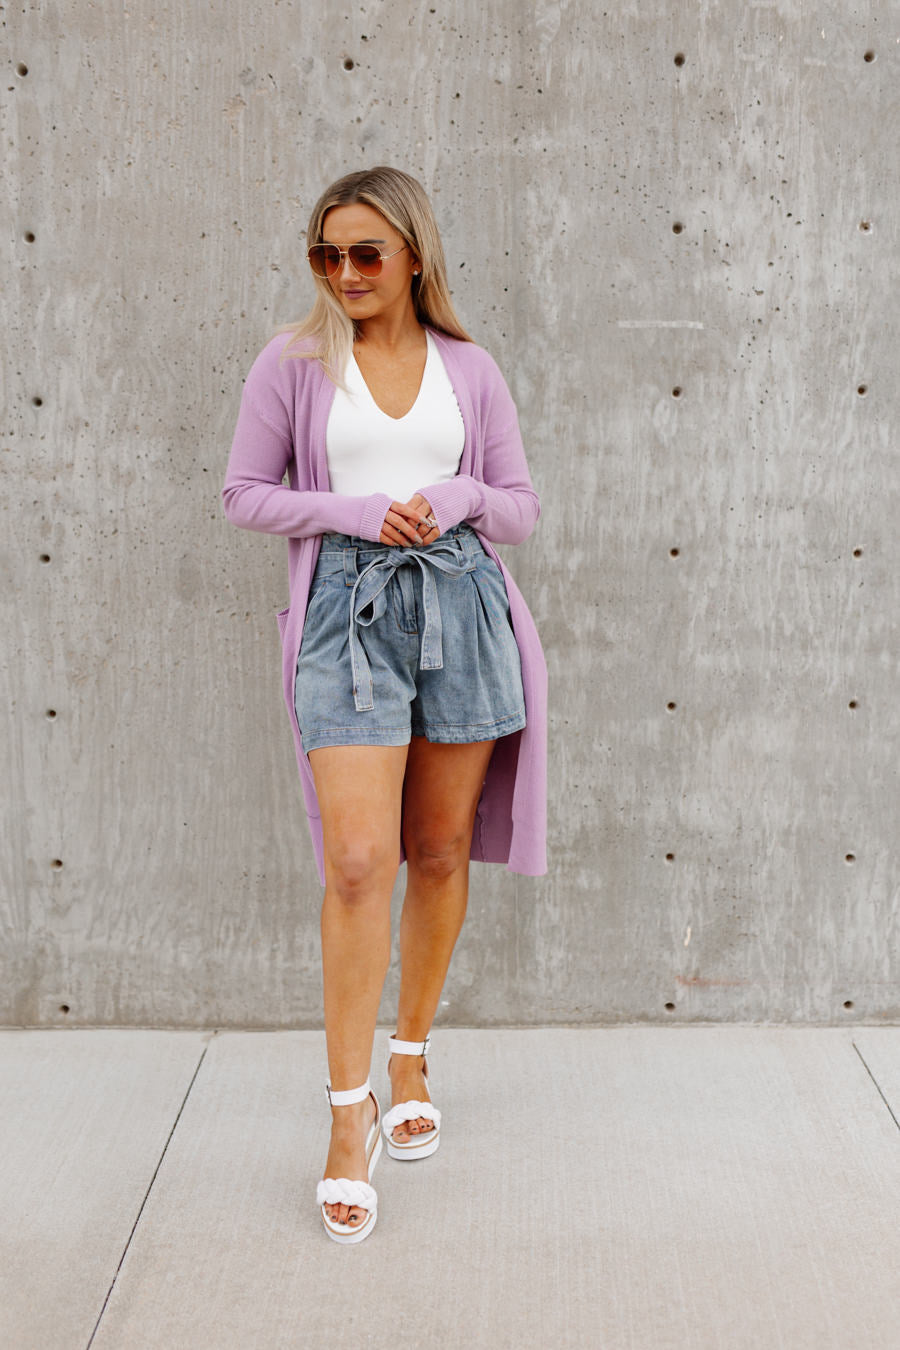 WEEKEND PLANS LIGHTWEIGHT KNIT CARDIGAN IN LILAC